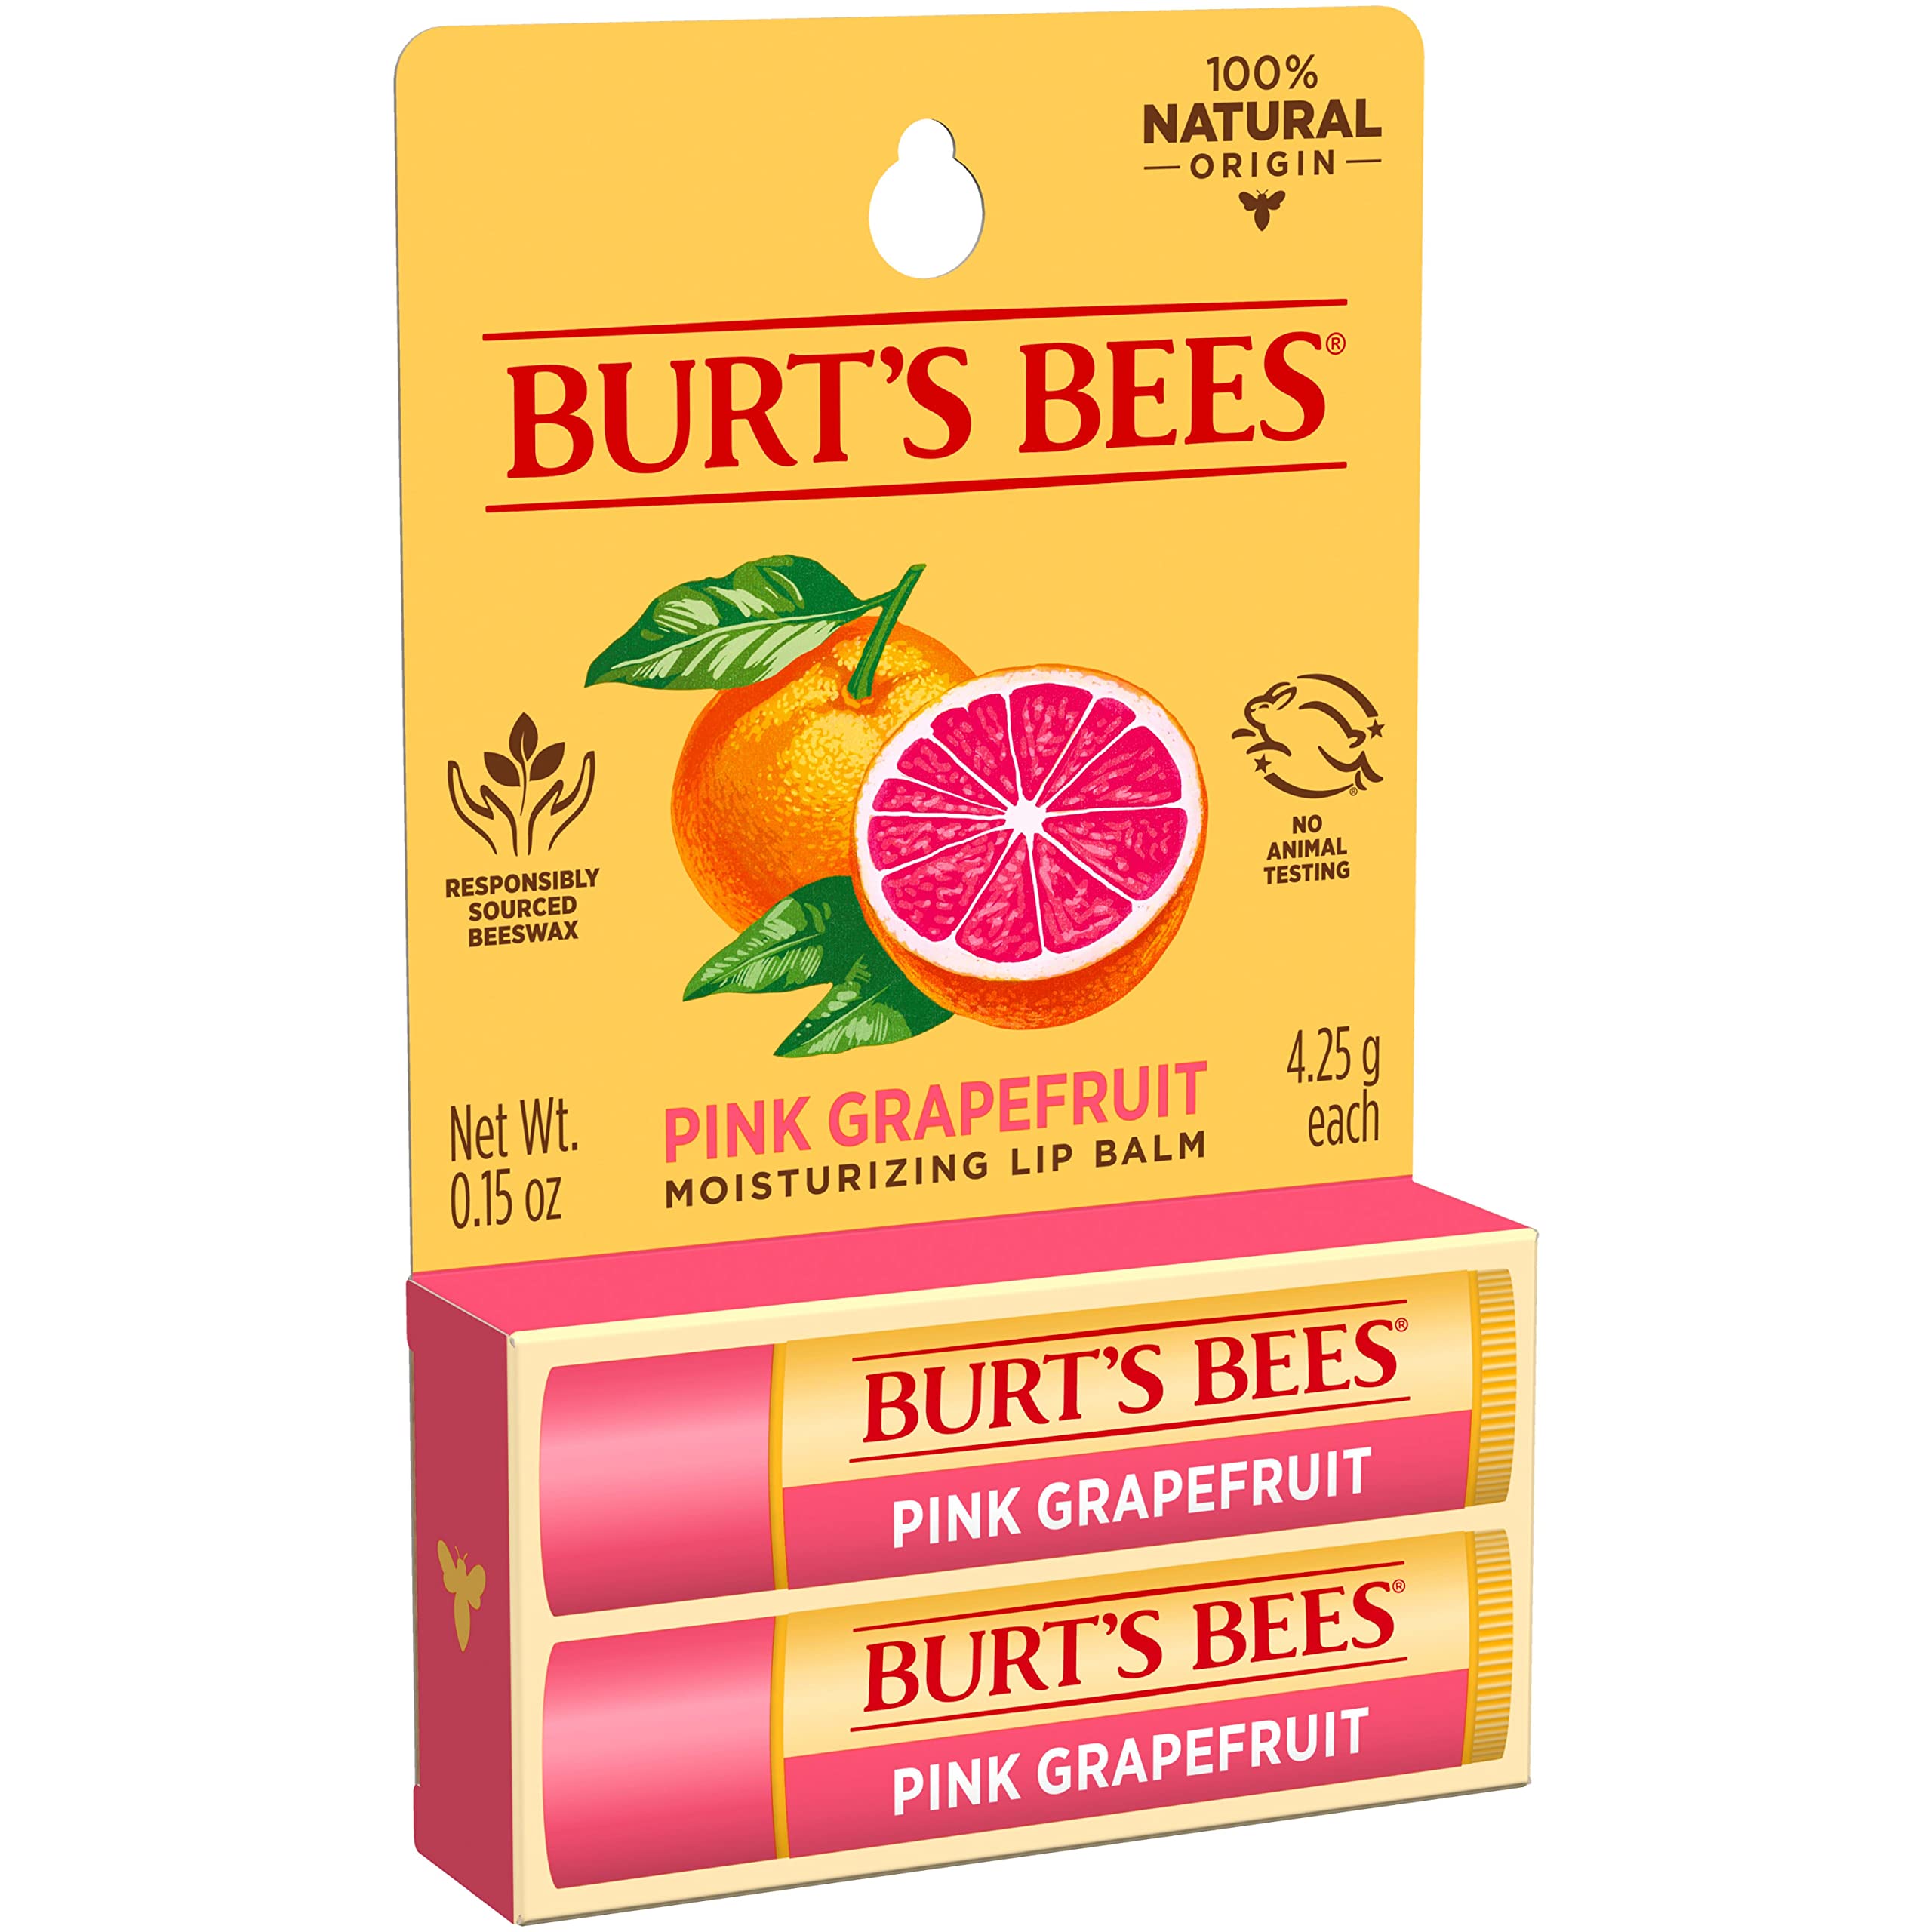 Burt's Bees Lip Balm, Moisturizing Lip Care, for All Day Hydration, 100% Natural, Pink Grapefruit with Beeswax & Fruit Extracts (2 Pack)